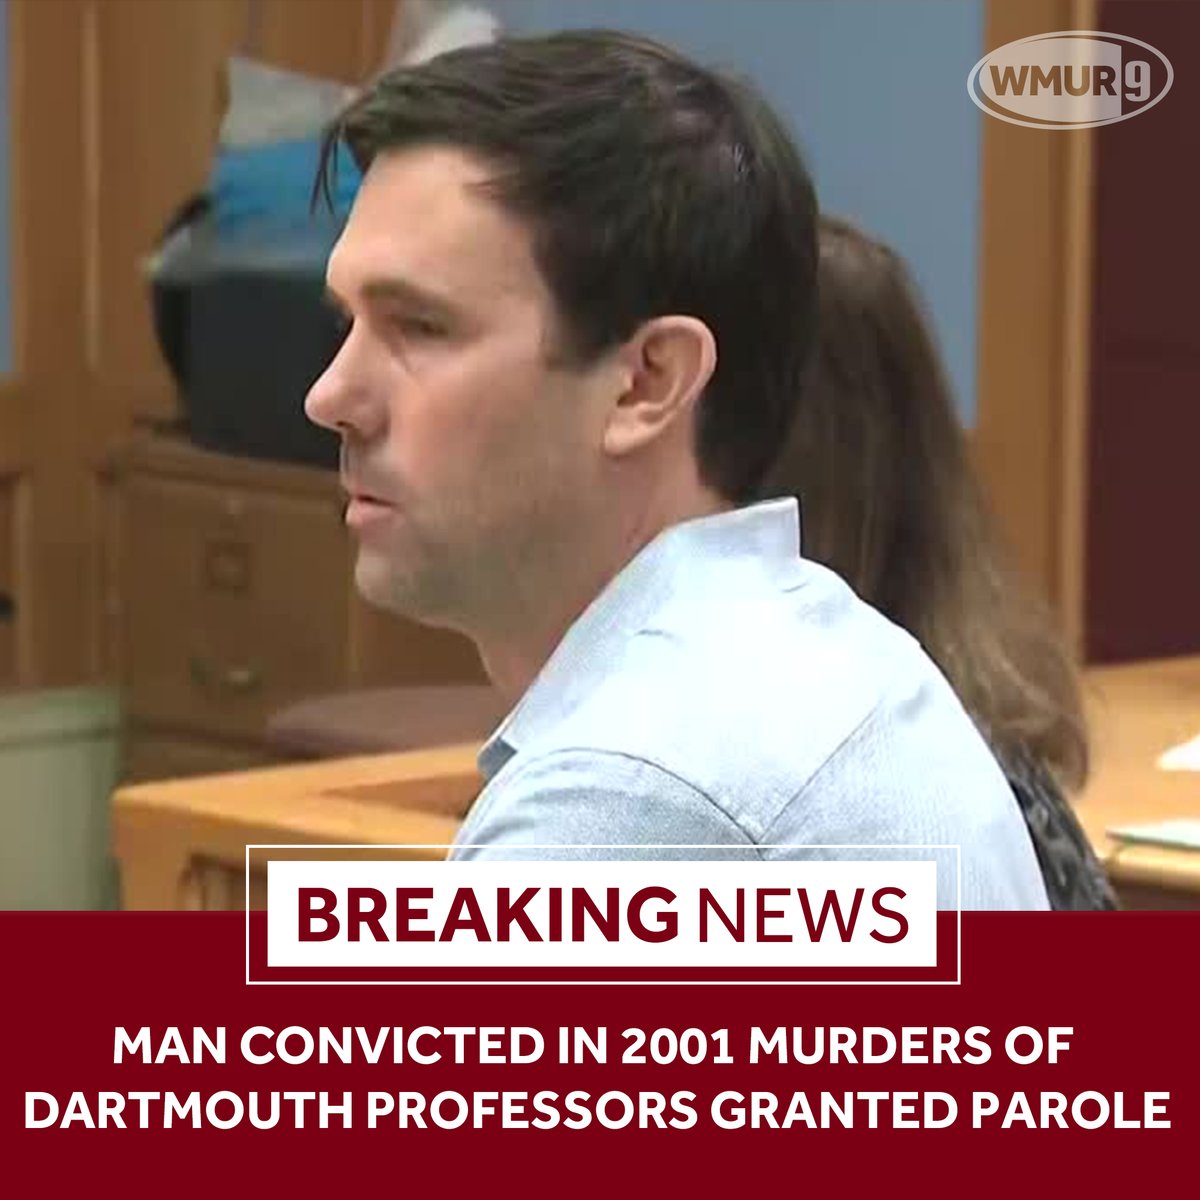 BREAKING NEWS: James Parker has been granted parole. He was convicted in the 2001 murders of Dartmouth professors Half and Susanne Zantop: wmur.com/article/half-s…